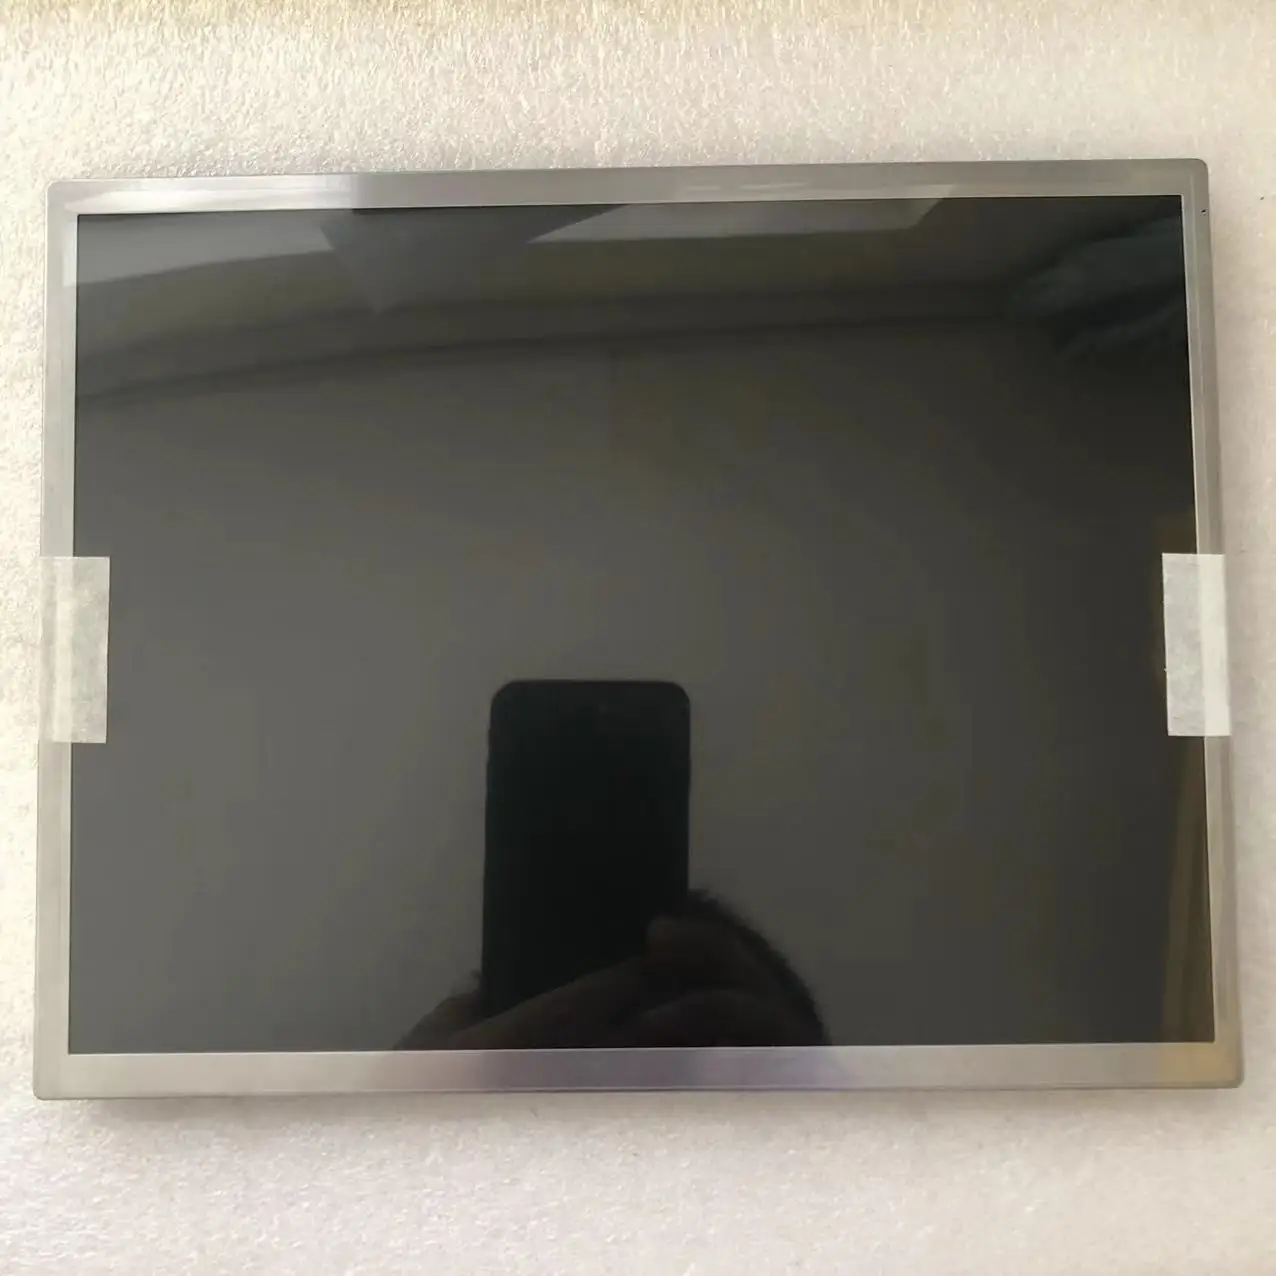 For 8.4-inch NL6448AC33-A1D LCD Screen Display Panel Fully Tested Before Shipment for 10 4 inch lj640u48 lcd screen display panel tft repair fully tested before shipment